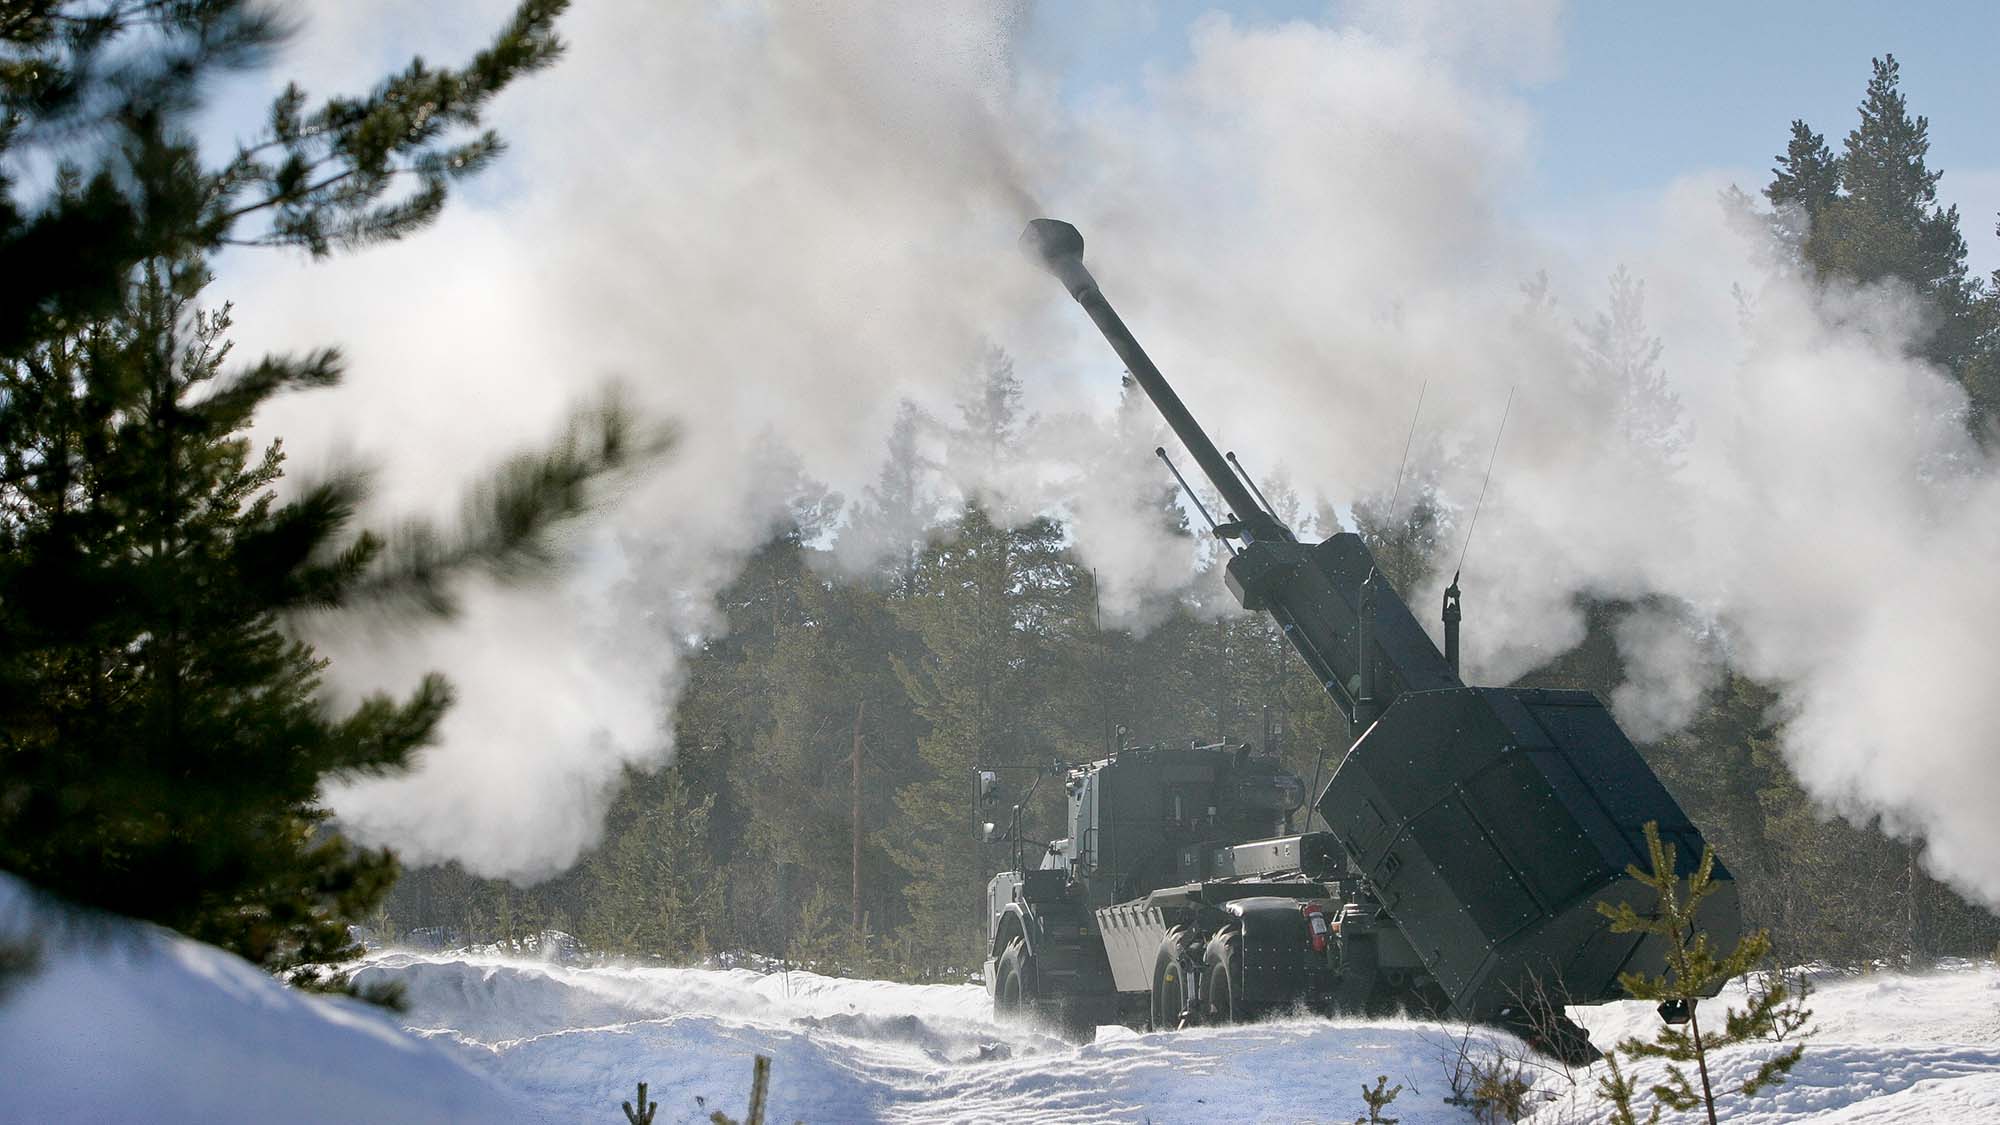 Sweden received 48 self-propelled Archer artillery systems with a range of up to 60 km, some of which may be transferred to Ukraine